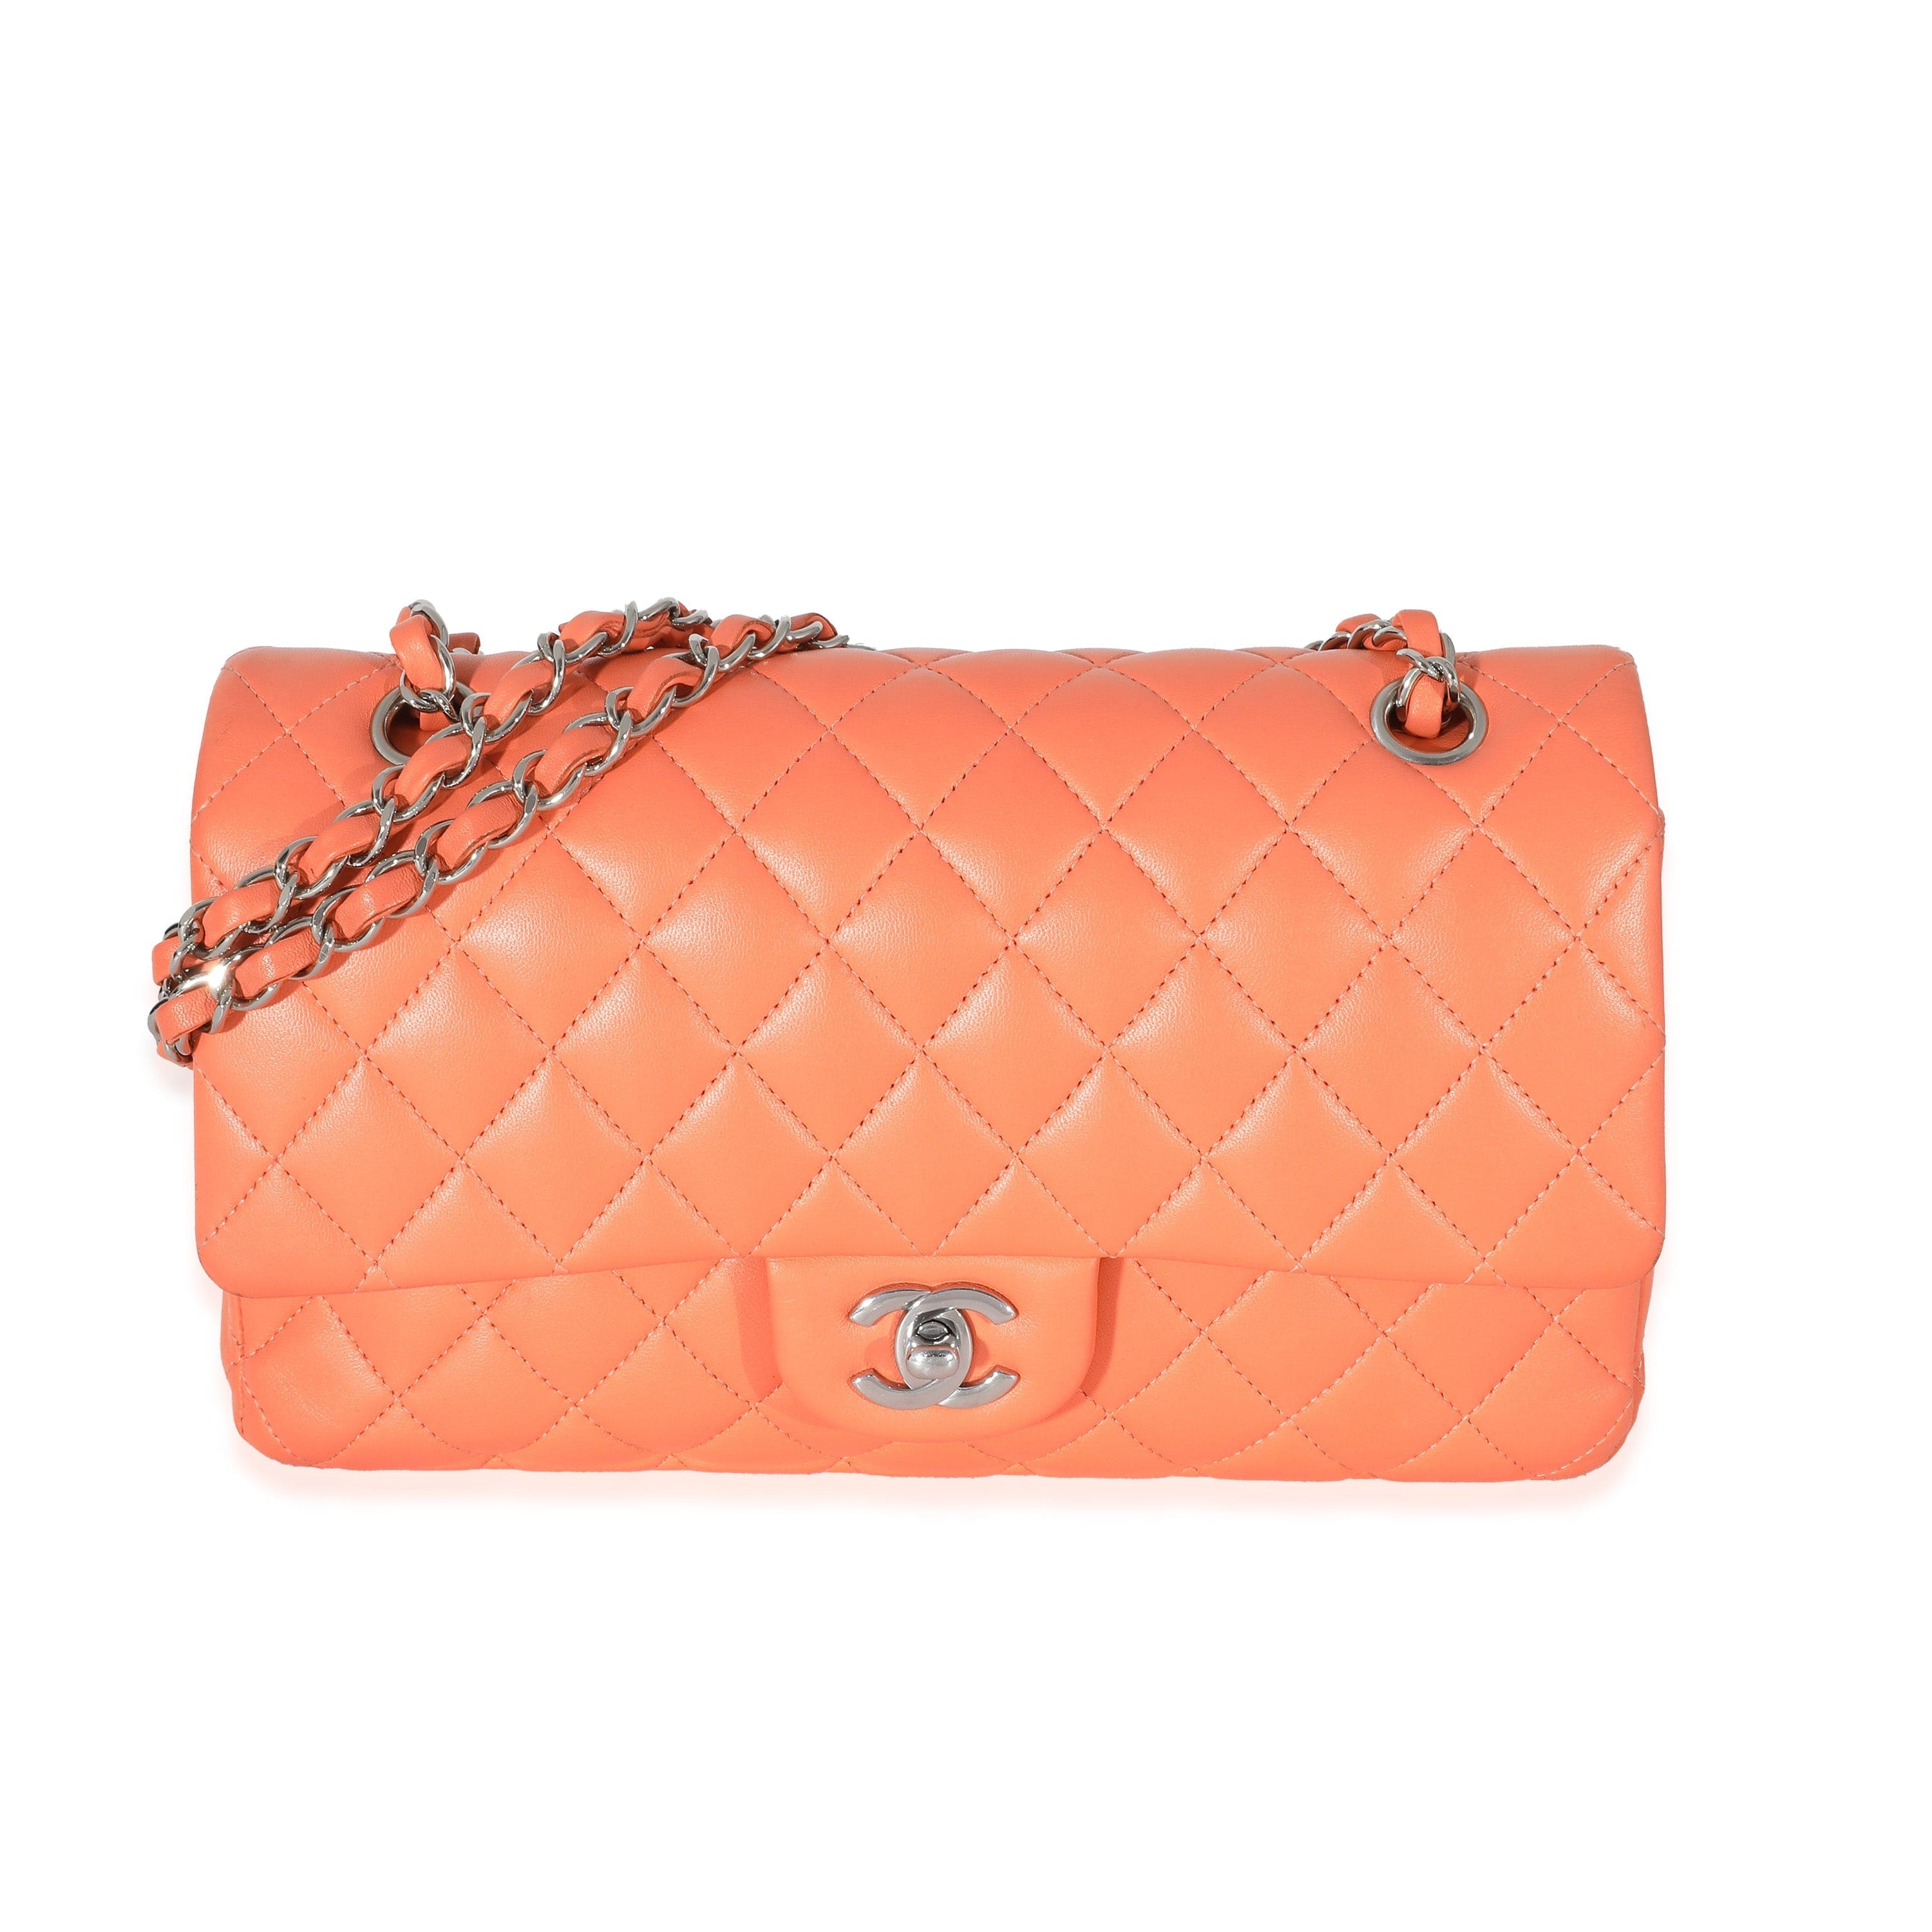 Chanel Chanel Orange Quilted Lambskin Medium Classic Double Flap Bag